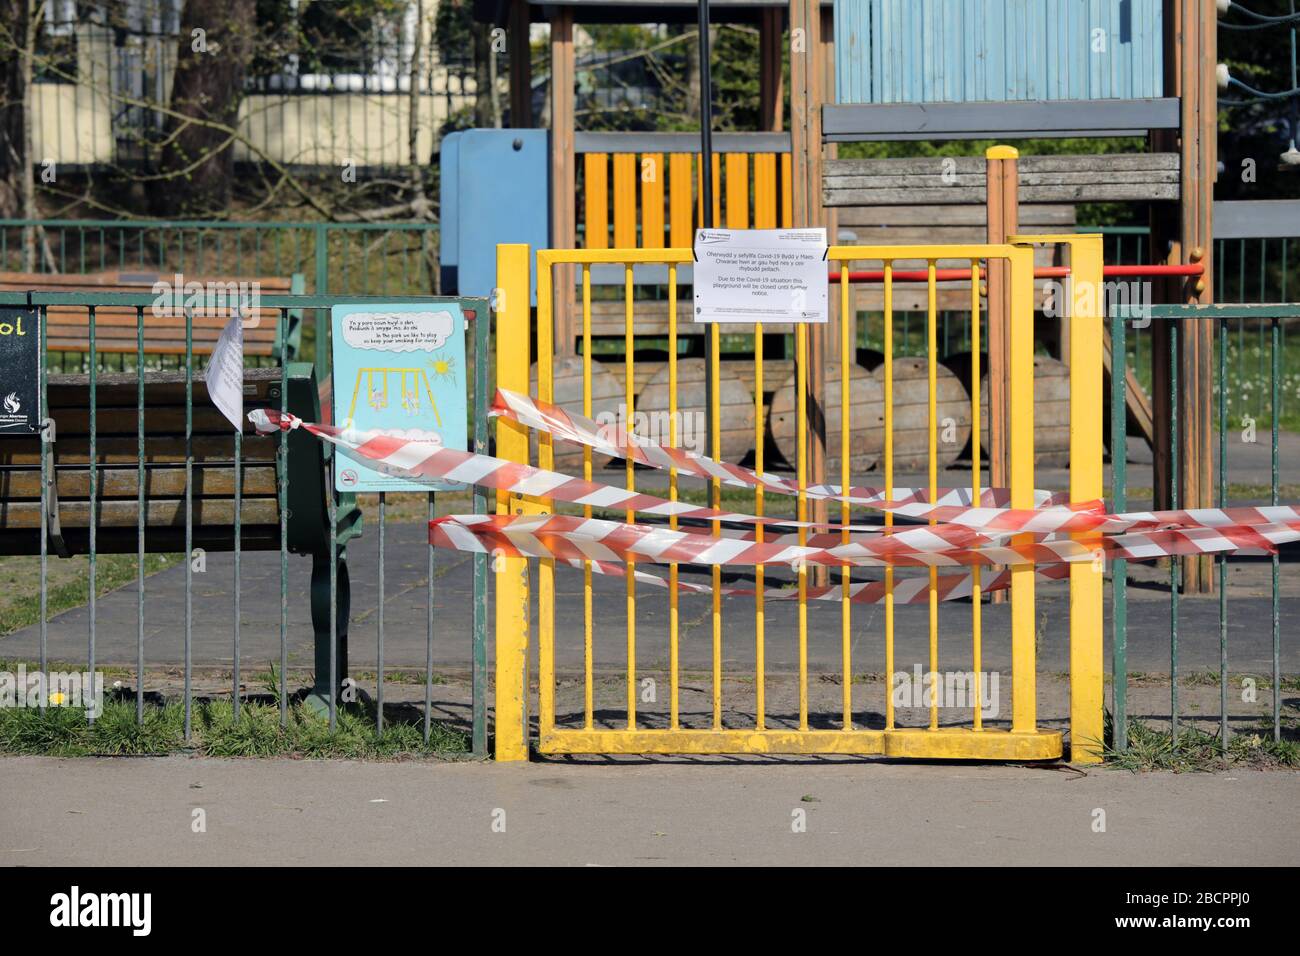 Swansea, Wales, UK - April 5, 2020: Closed outdoor play area. Children's play area locked gate with red and white tape to stop people gathering. Coron Stock Photo